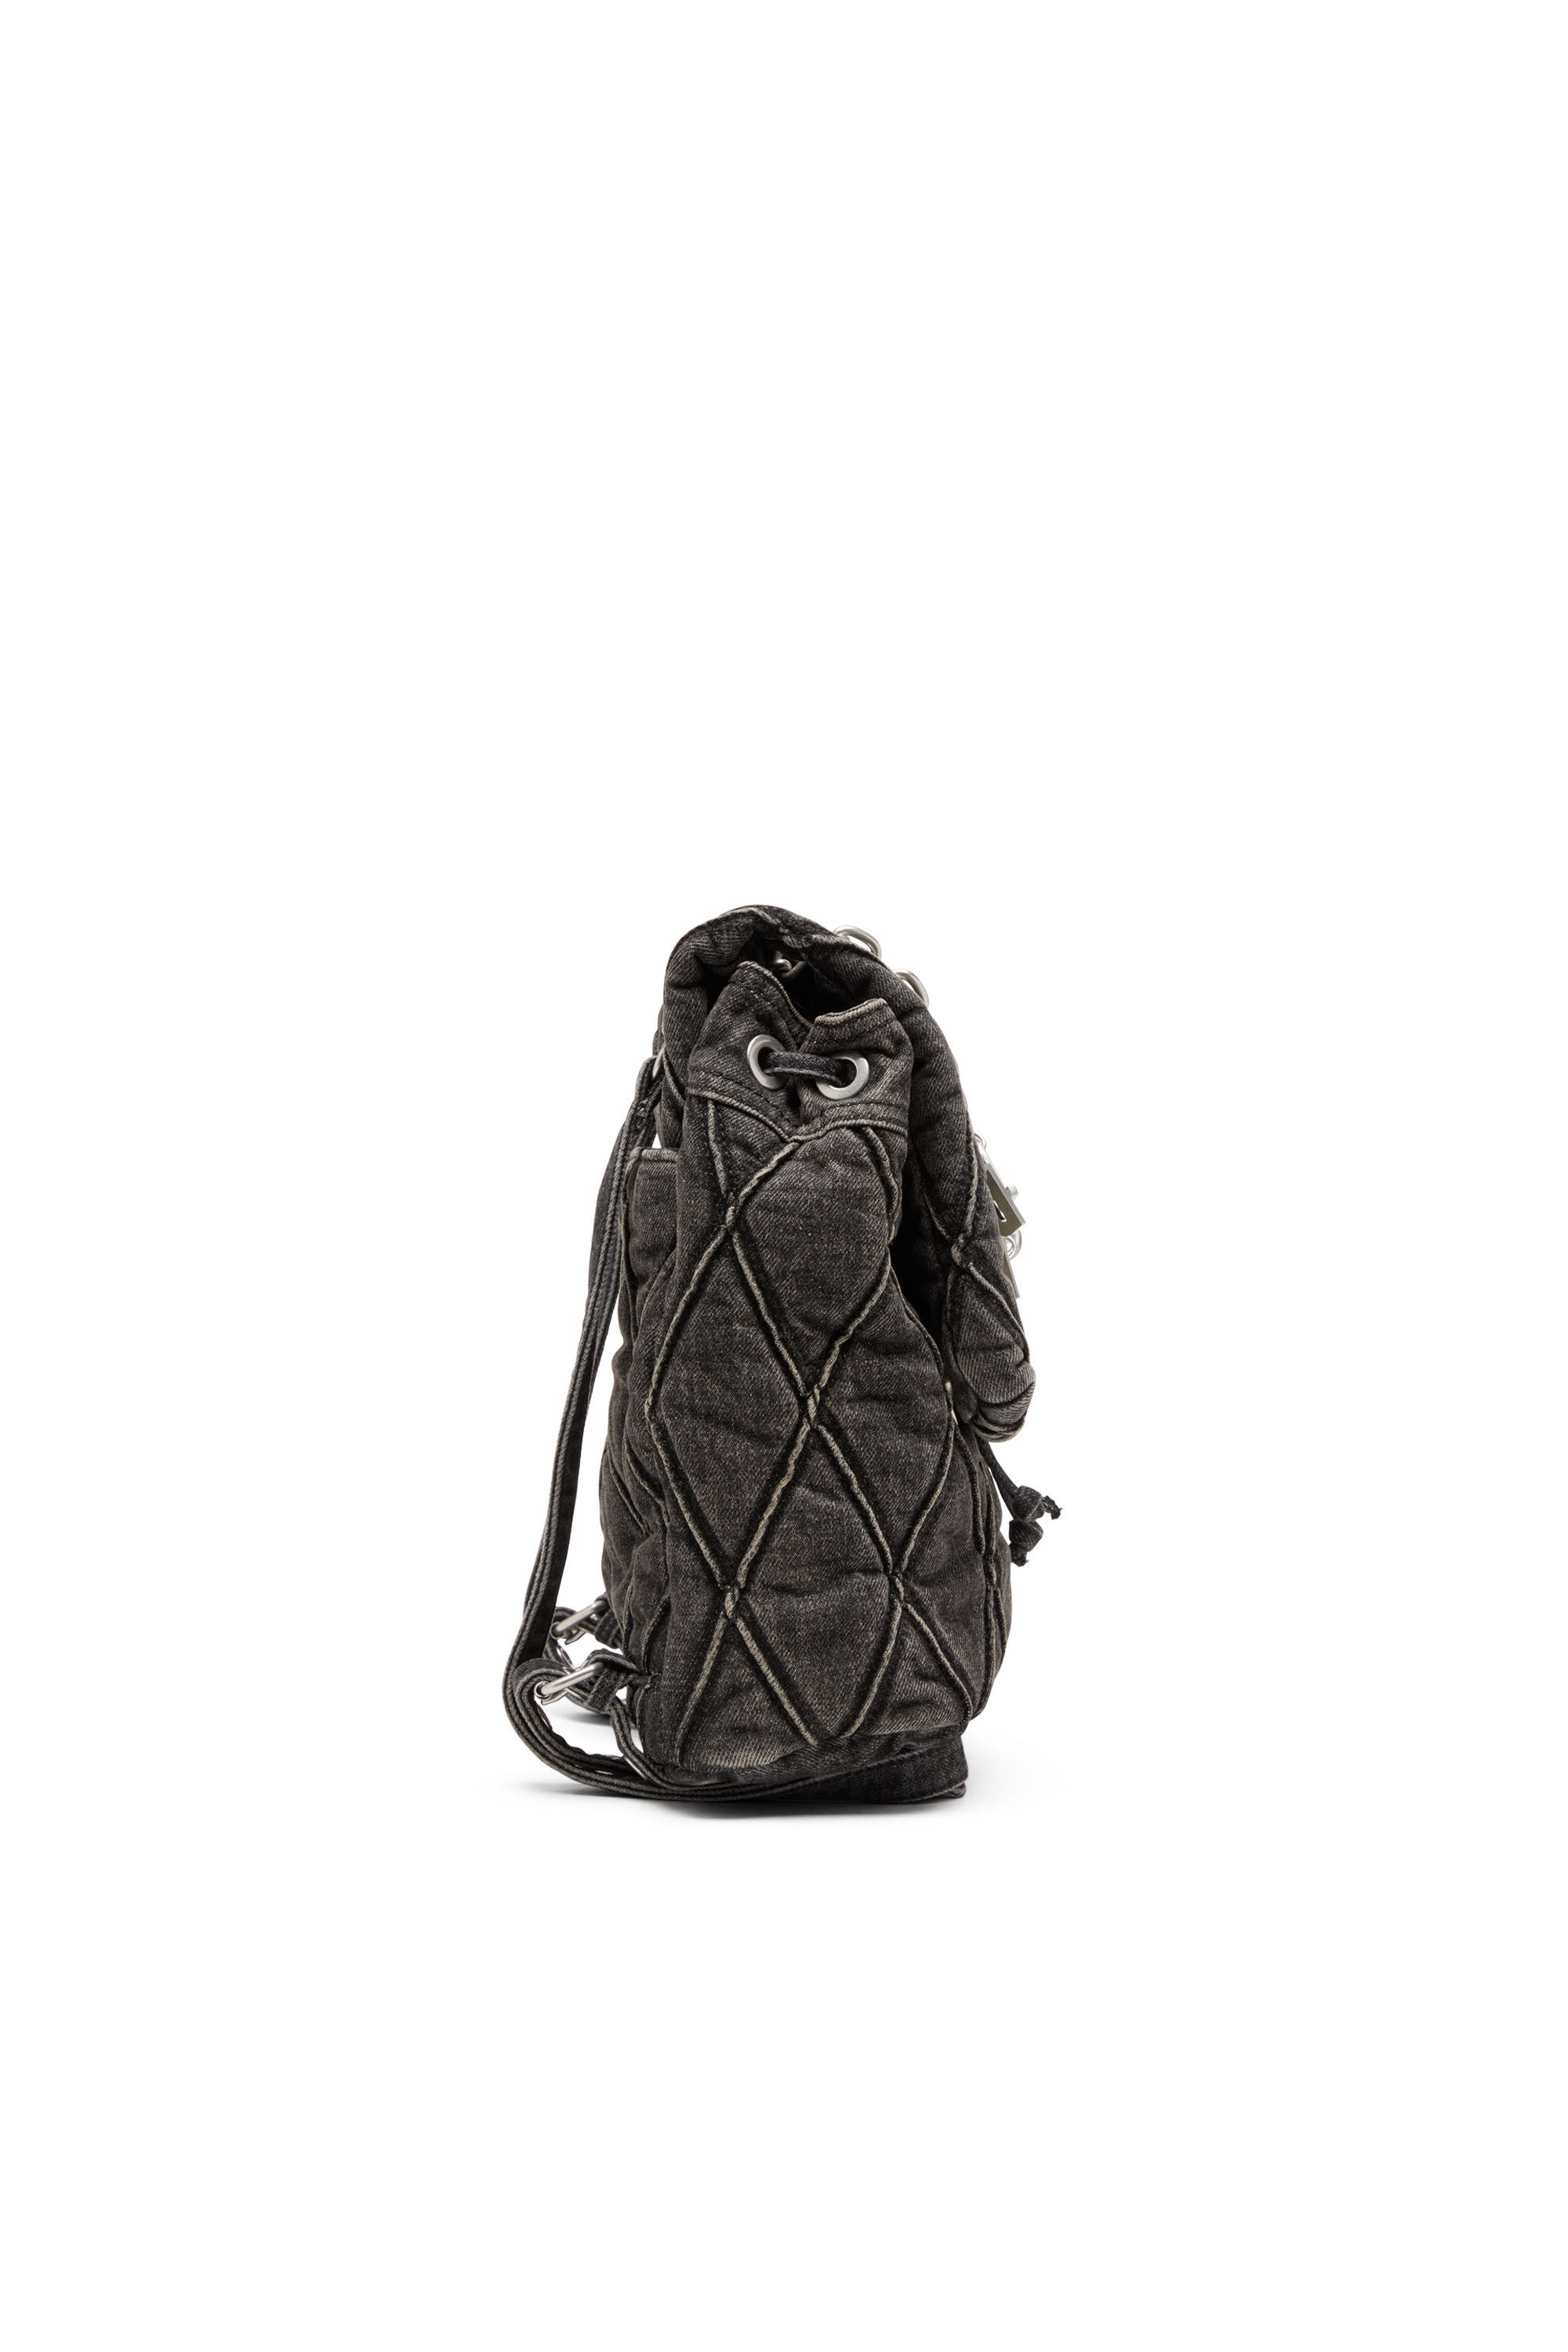 Diesel - CHARM-D BACKPACK S, Woman Charm-D S-Backpack in Argyle quilted denim in Black - Image 4